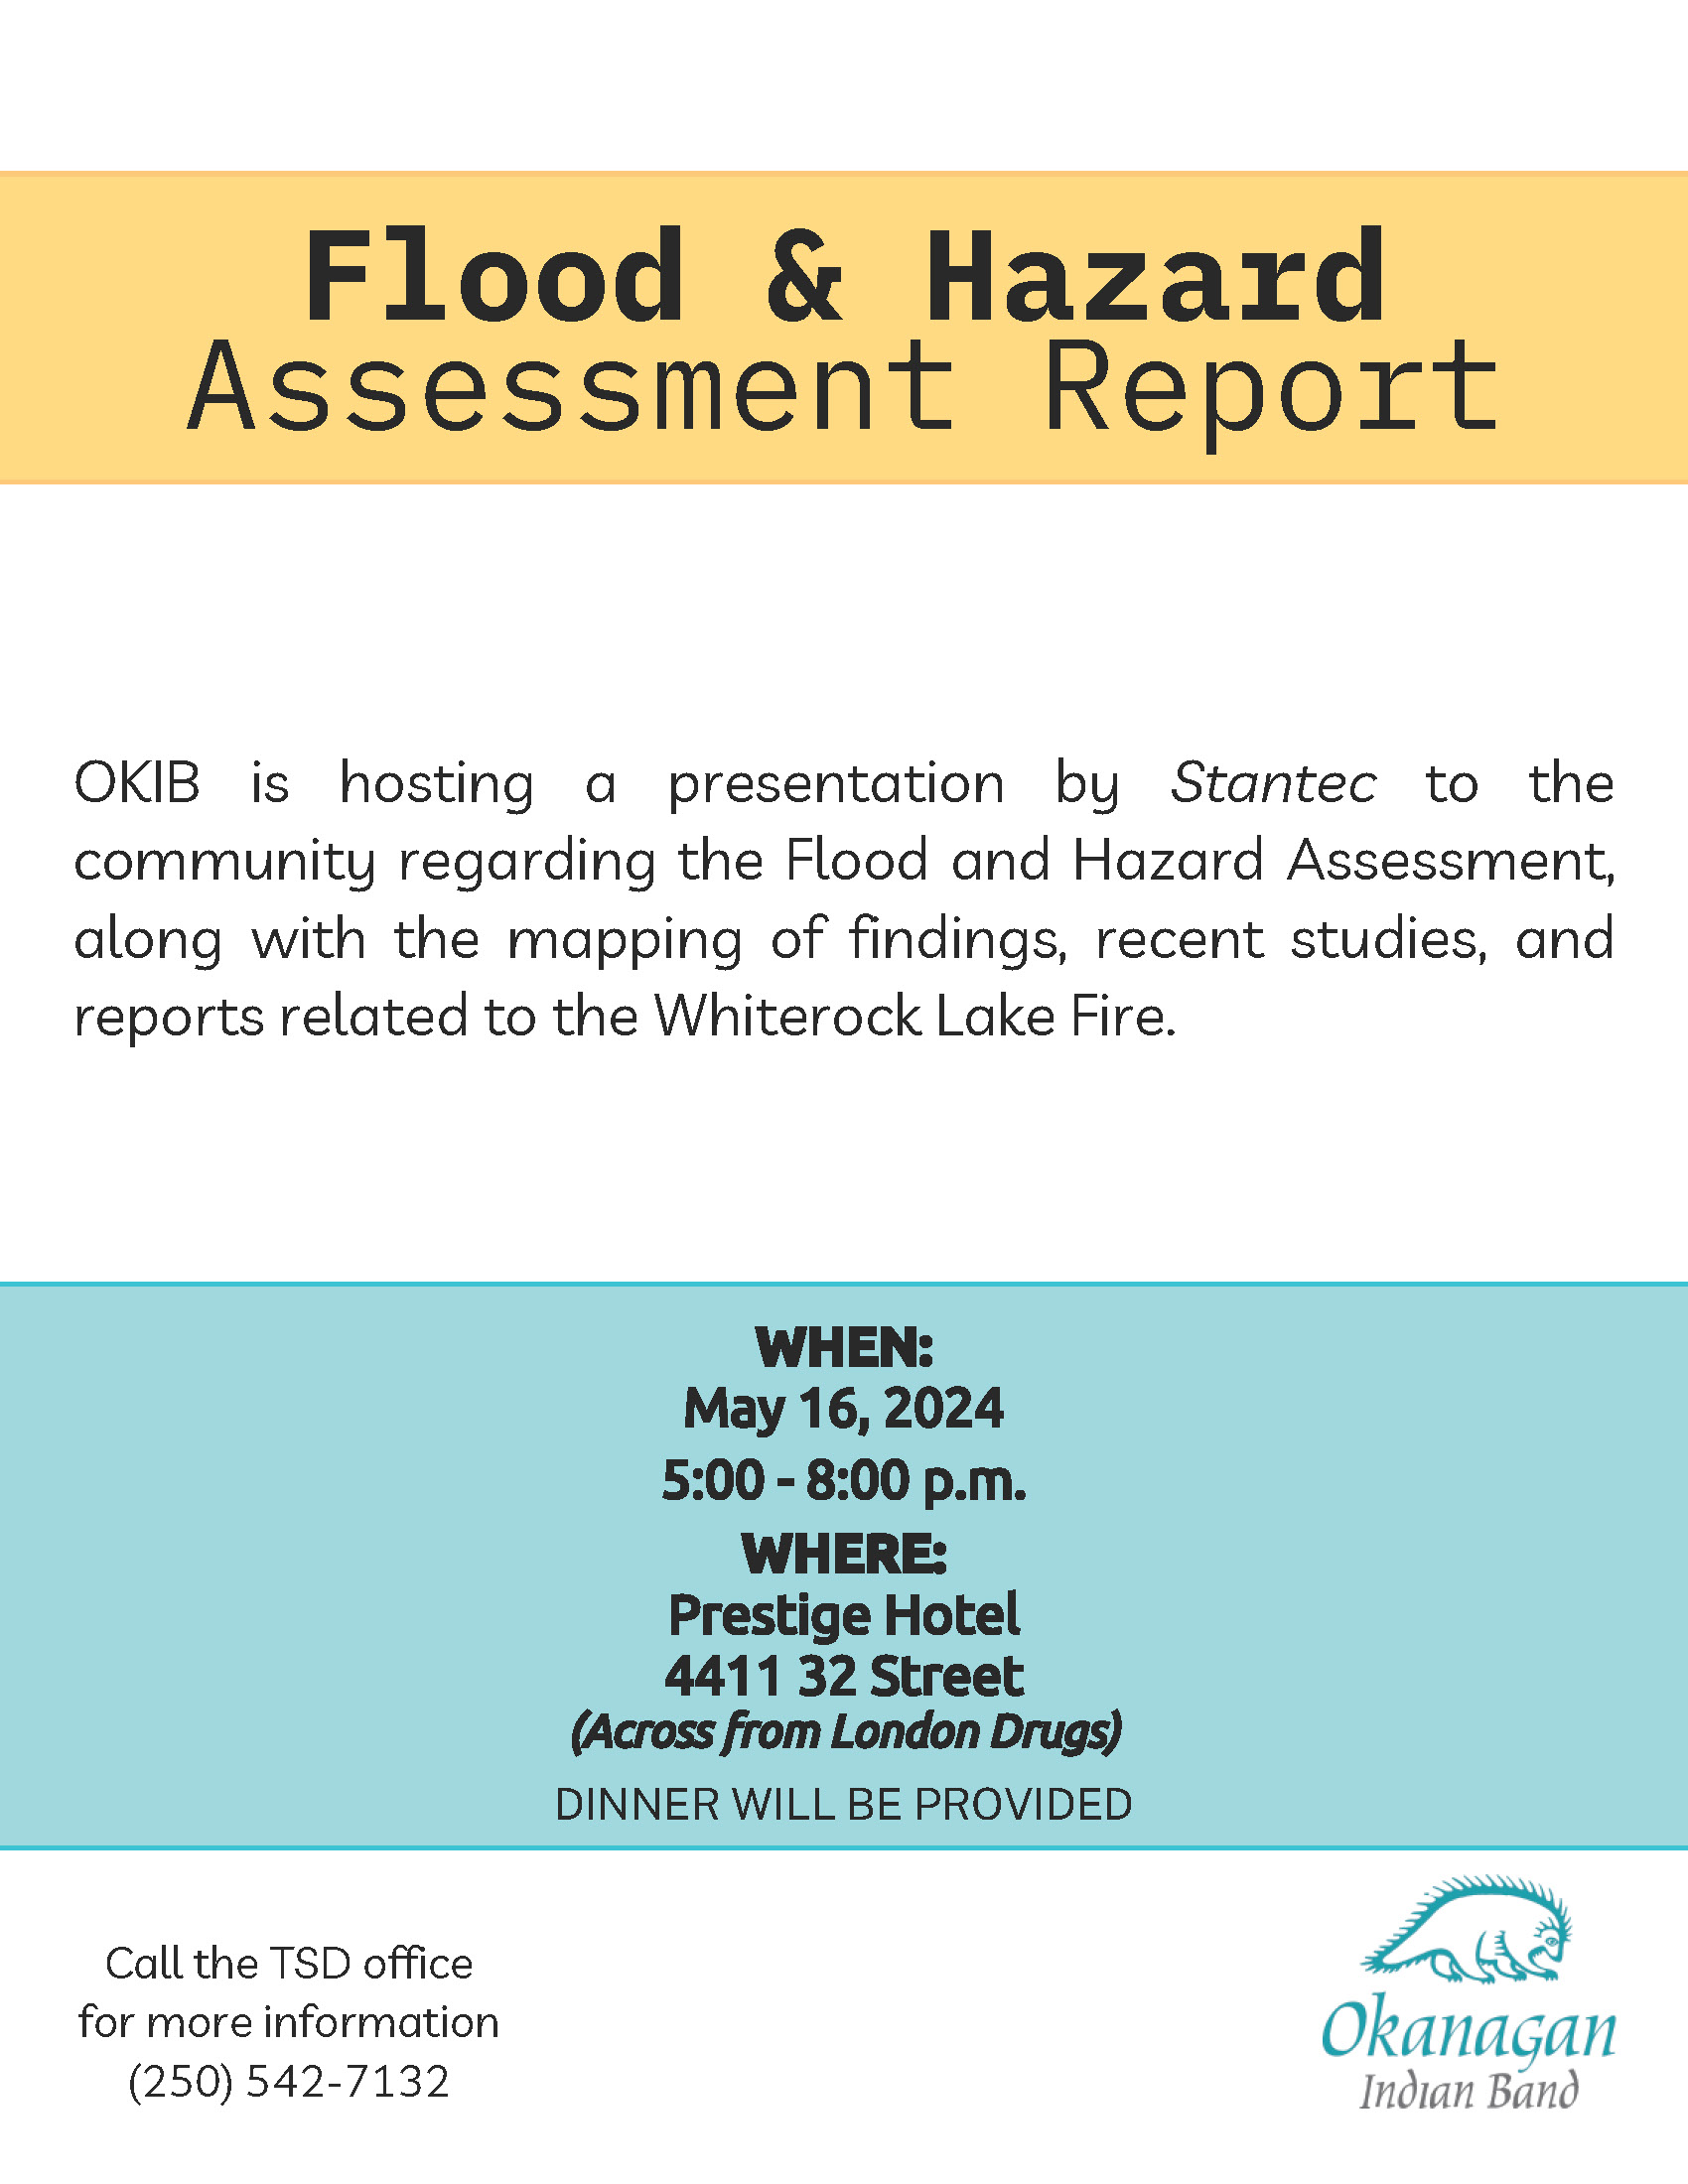 Reminder: Flood and Hazard Assessment Report meeting tomorrow